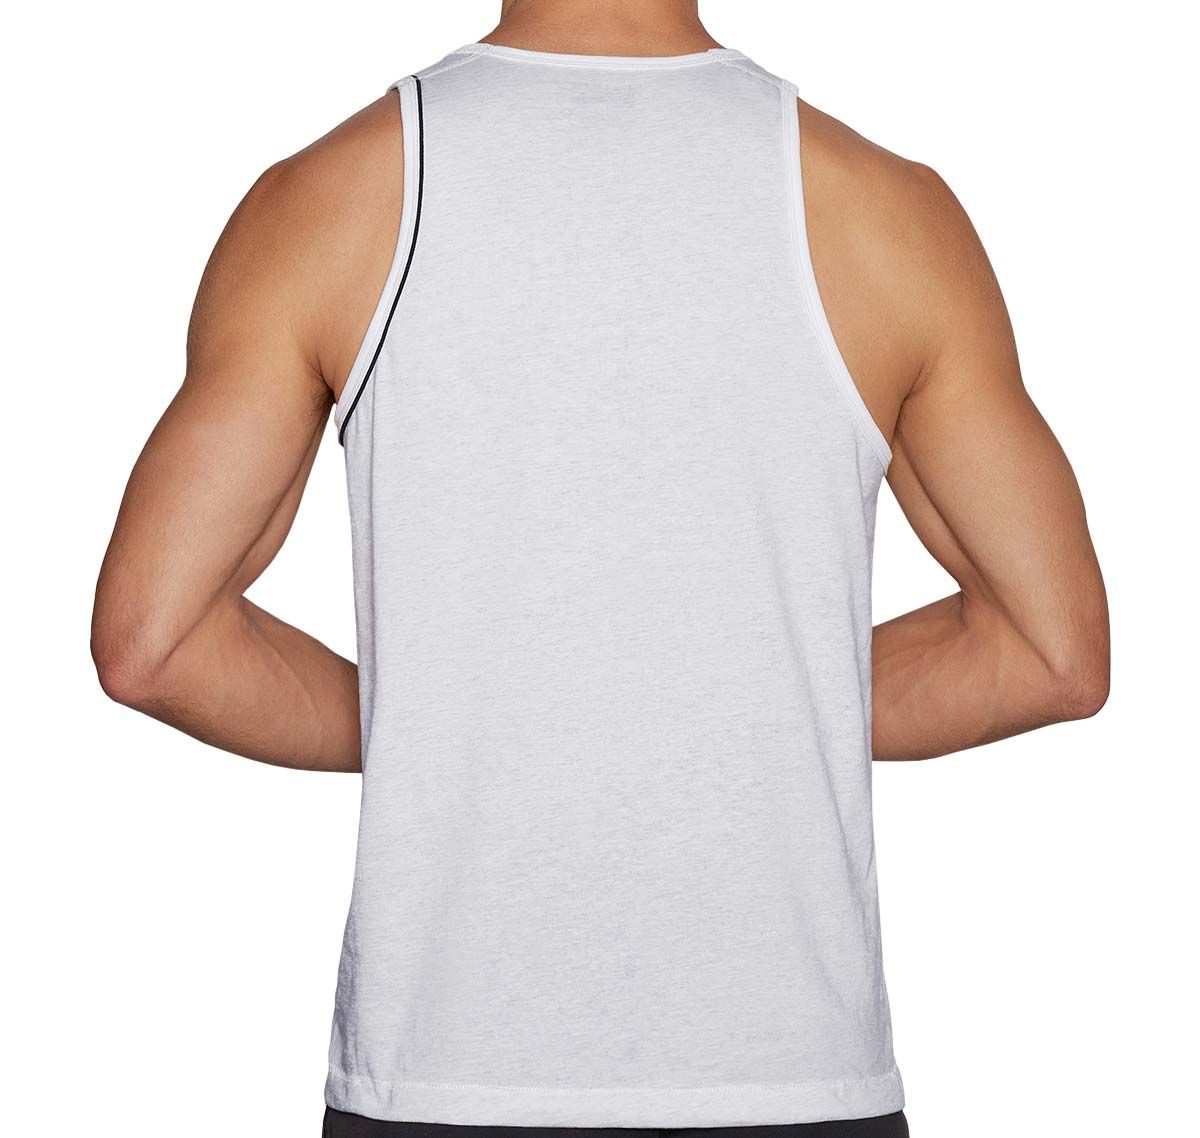 C-IN2 Débardeur HAND ME DOWN RELAXED TANK WINTER WHITE 1926F-105, blanc